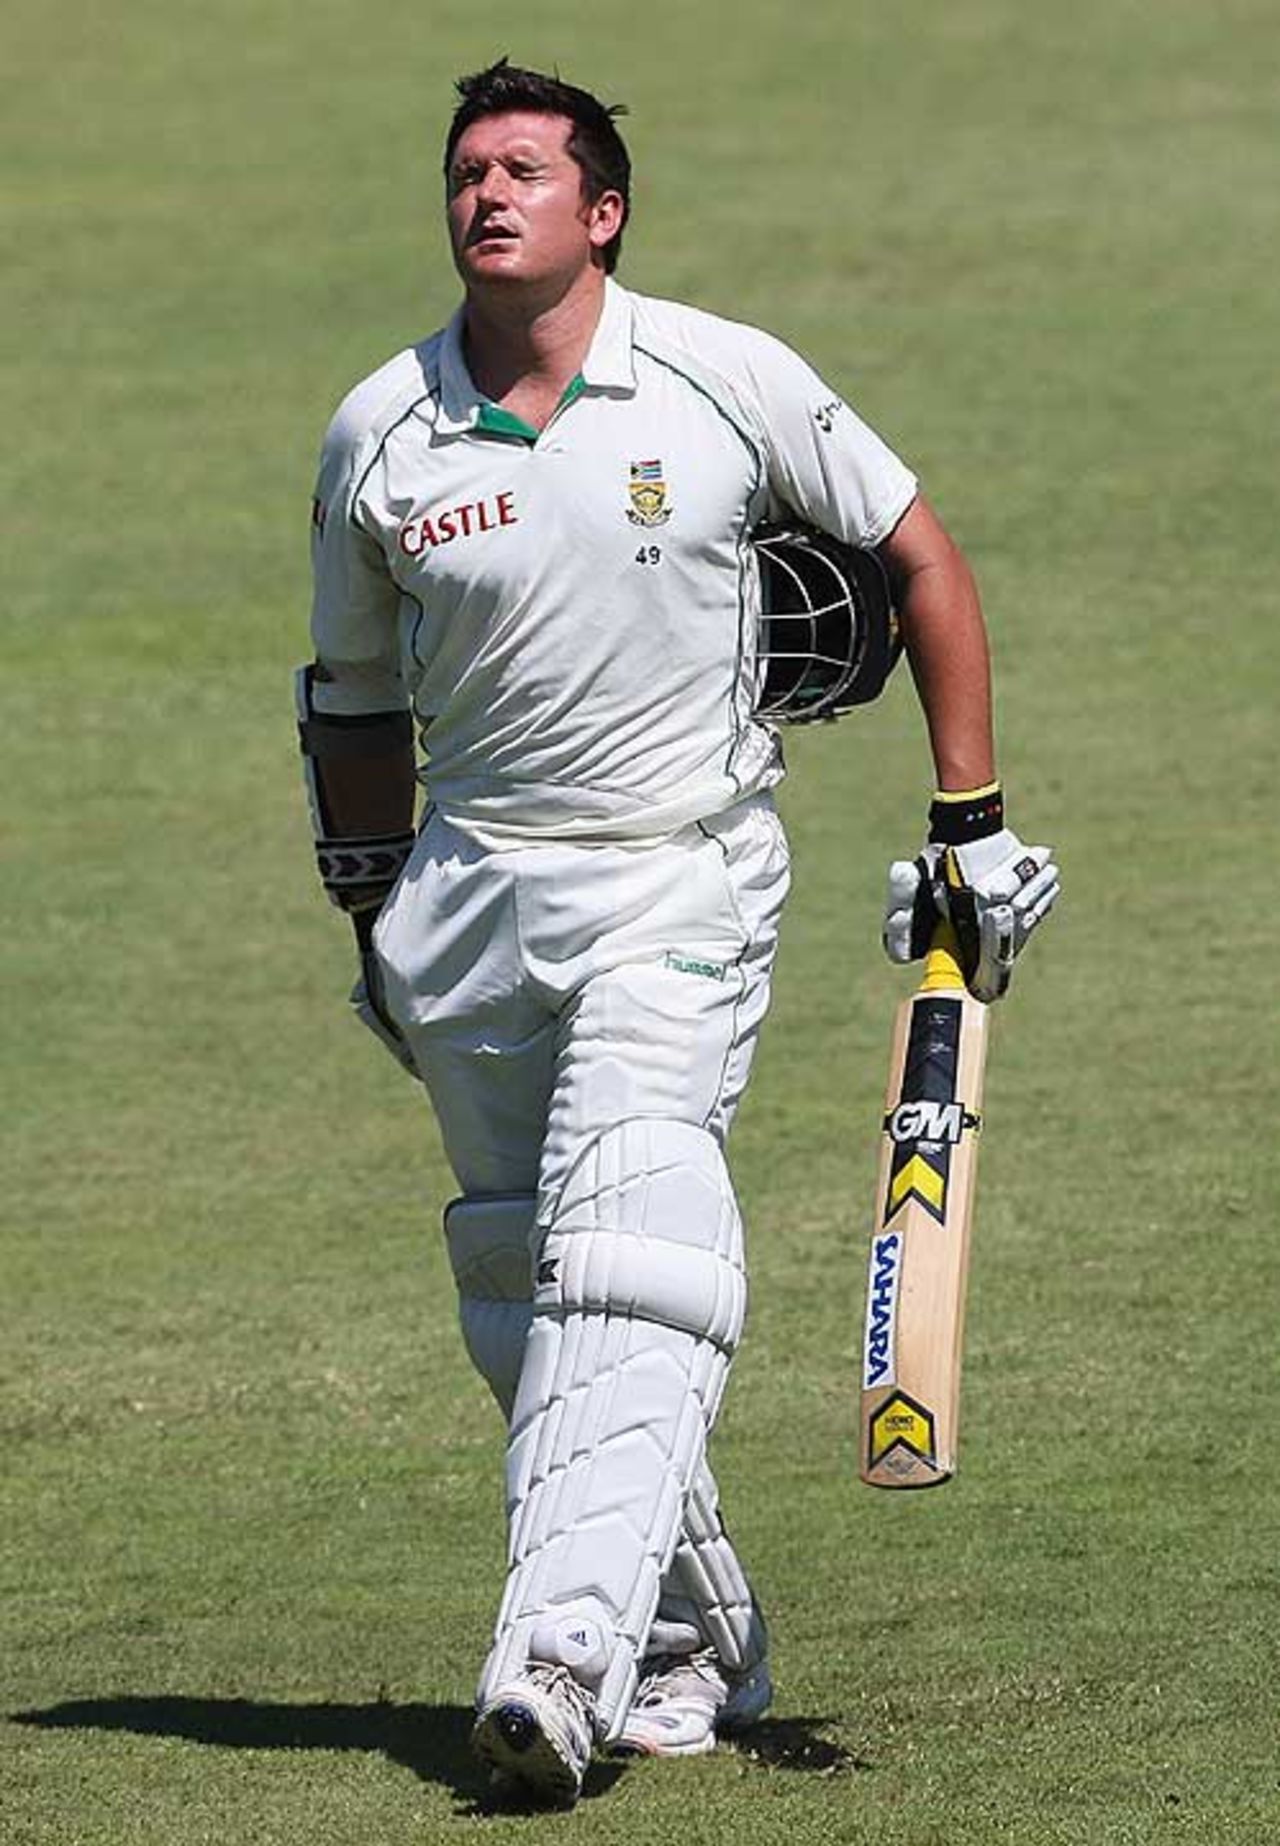 Graeme Smith had to go off after getting hit on his right hand, South Africa v Australia, 2nd Test, Durban, 2nd day, March 7, 2009